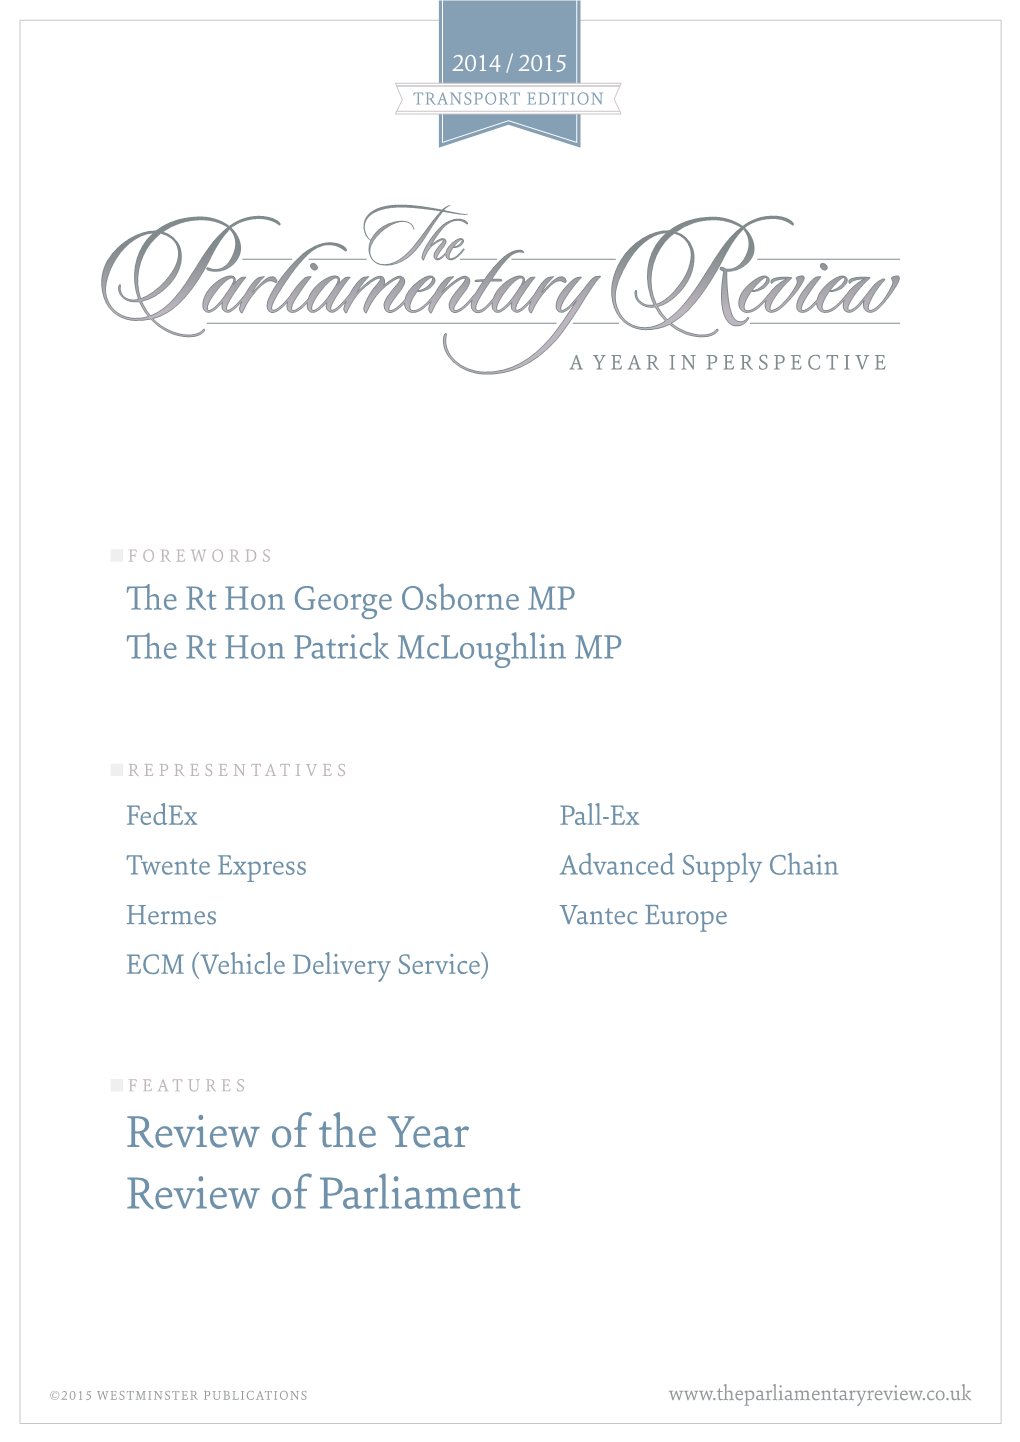 THE PARLIAMENTARY REVIEW Highlighting Best Practice